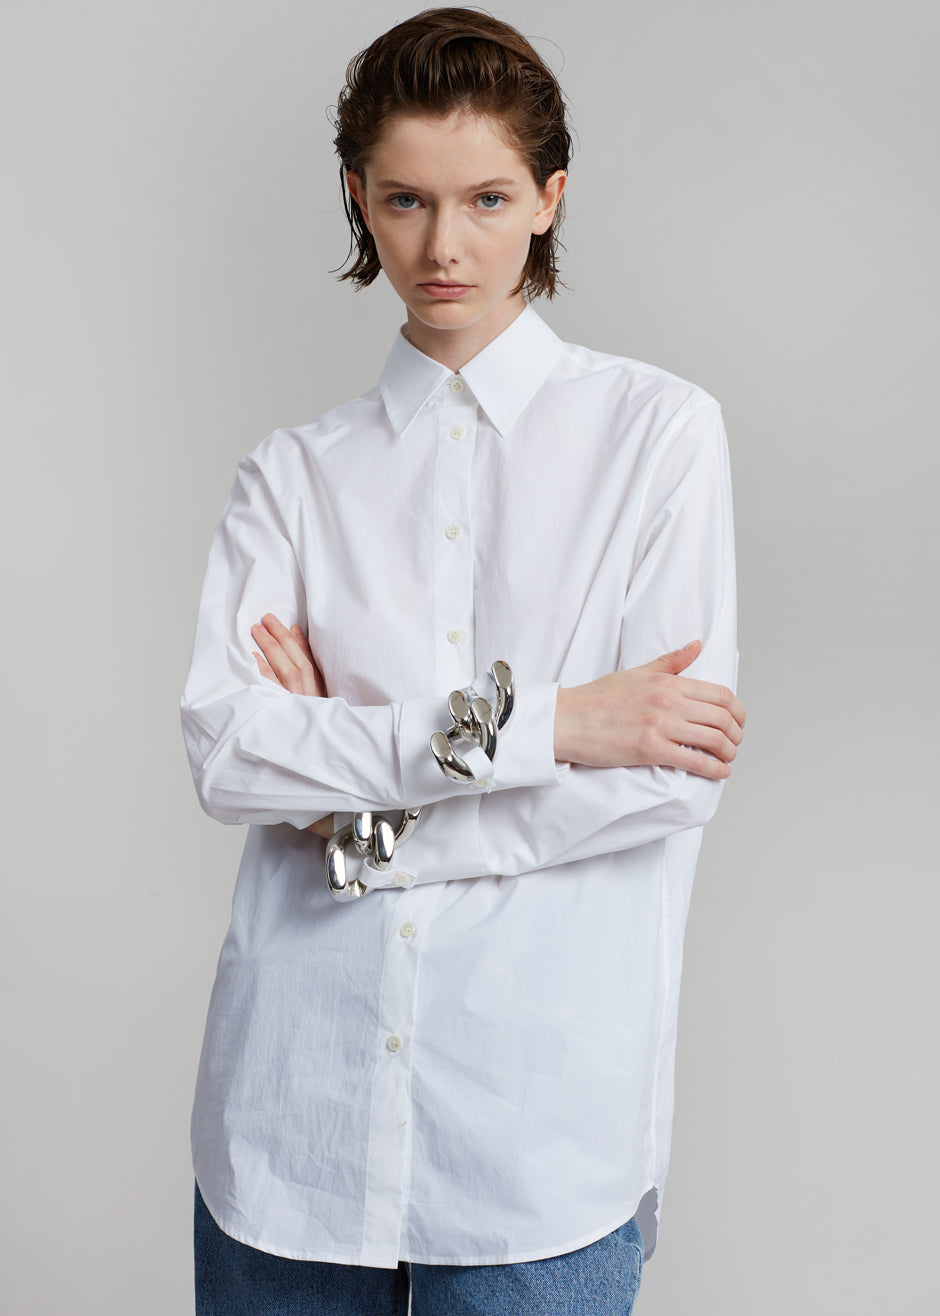 JW Anderson Silver Chain Link Shirt - White - 1